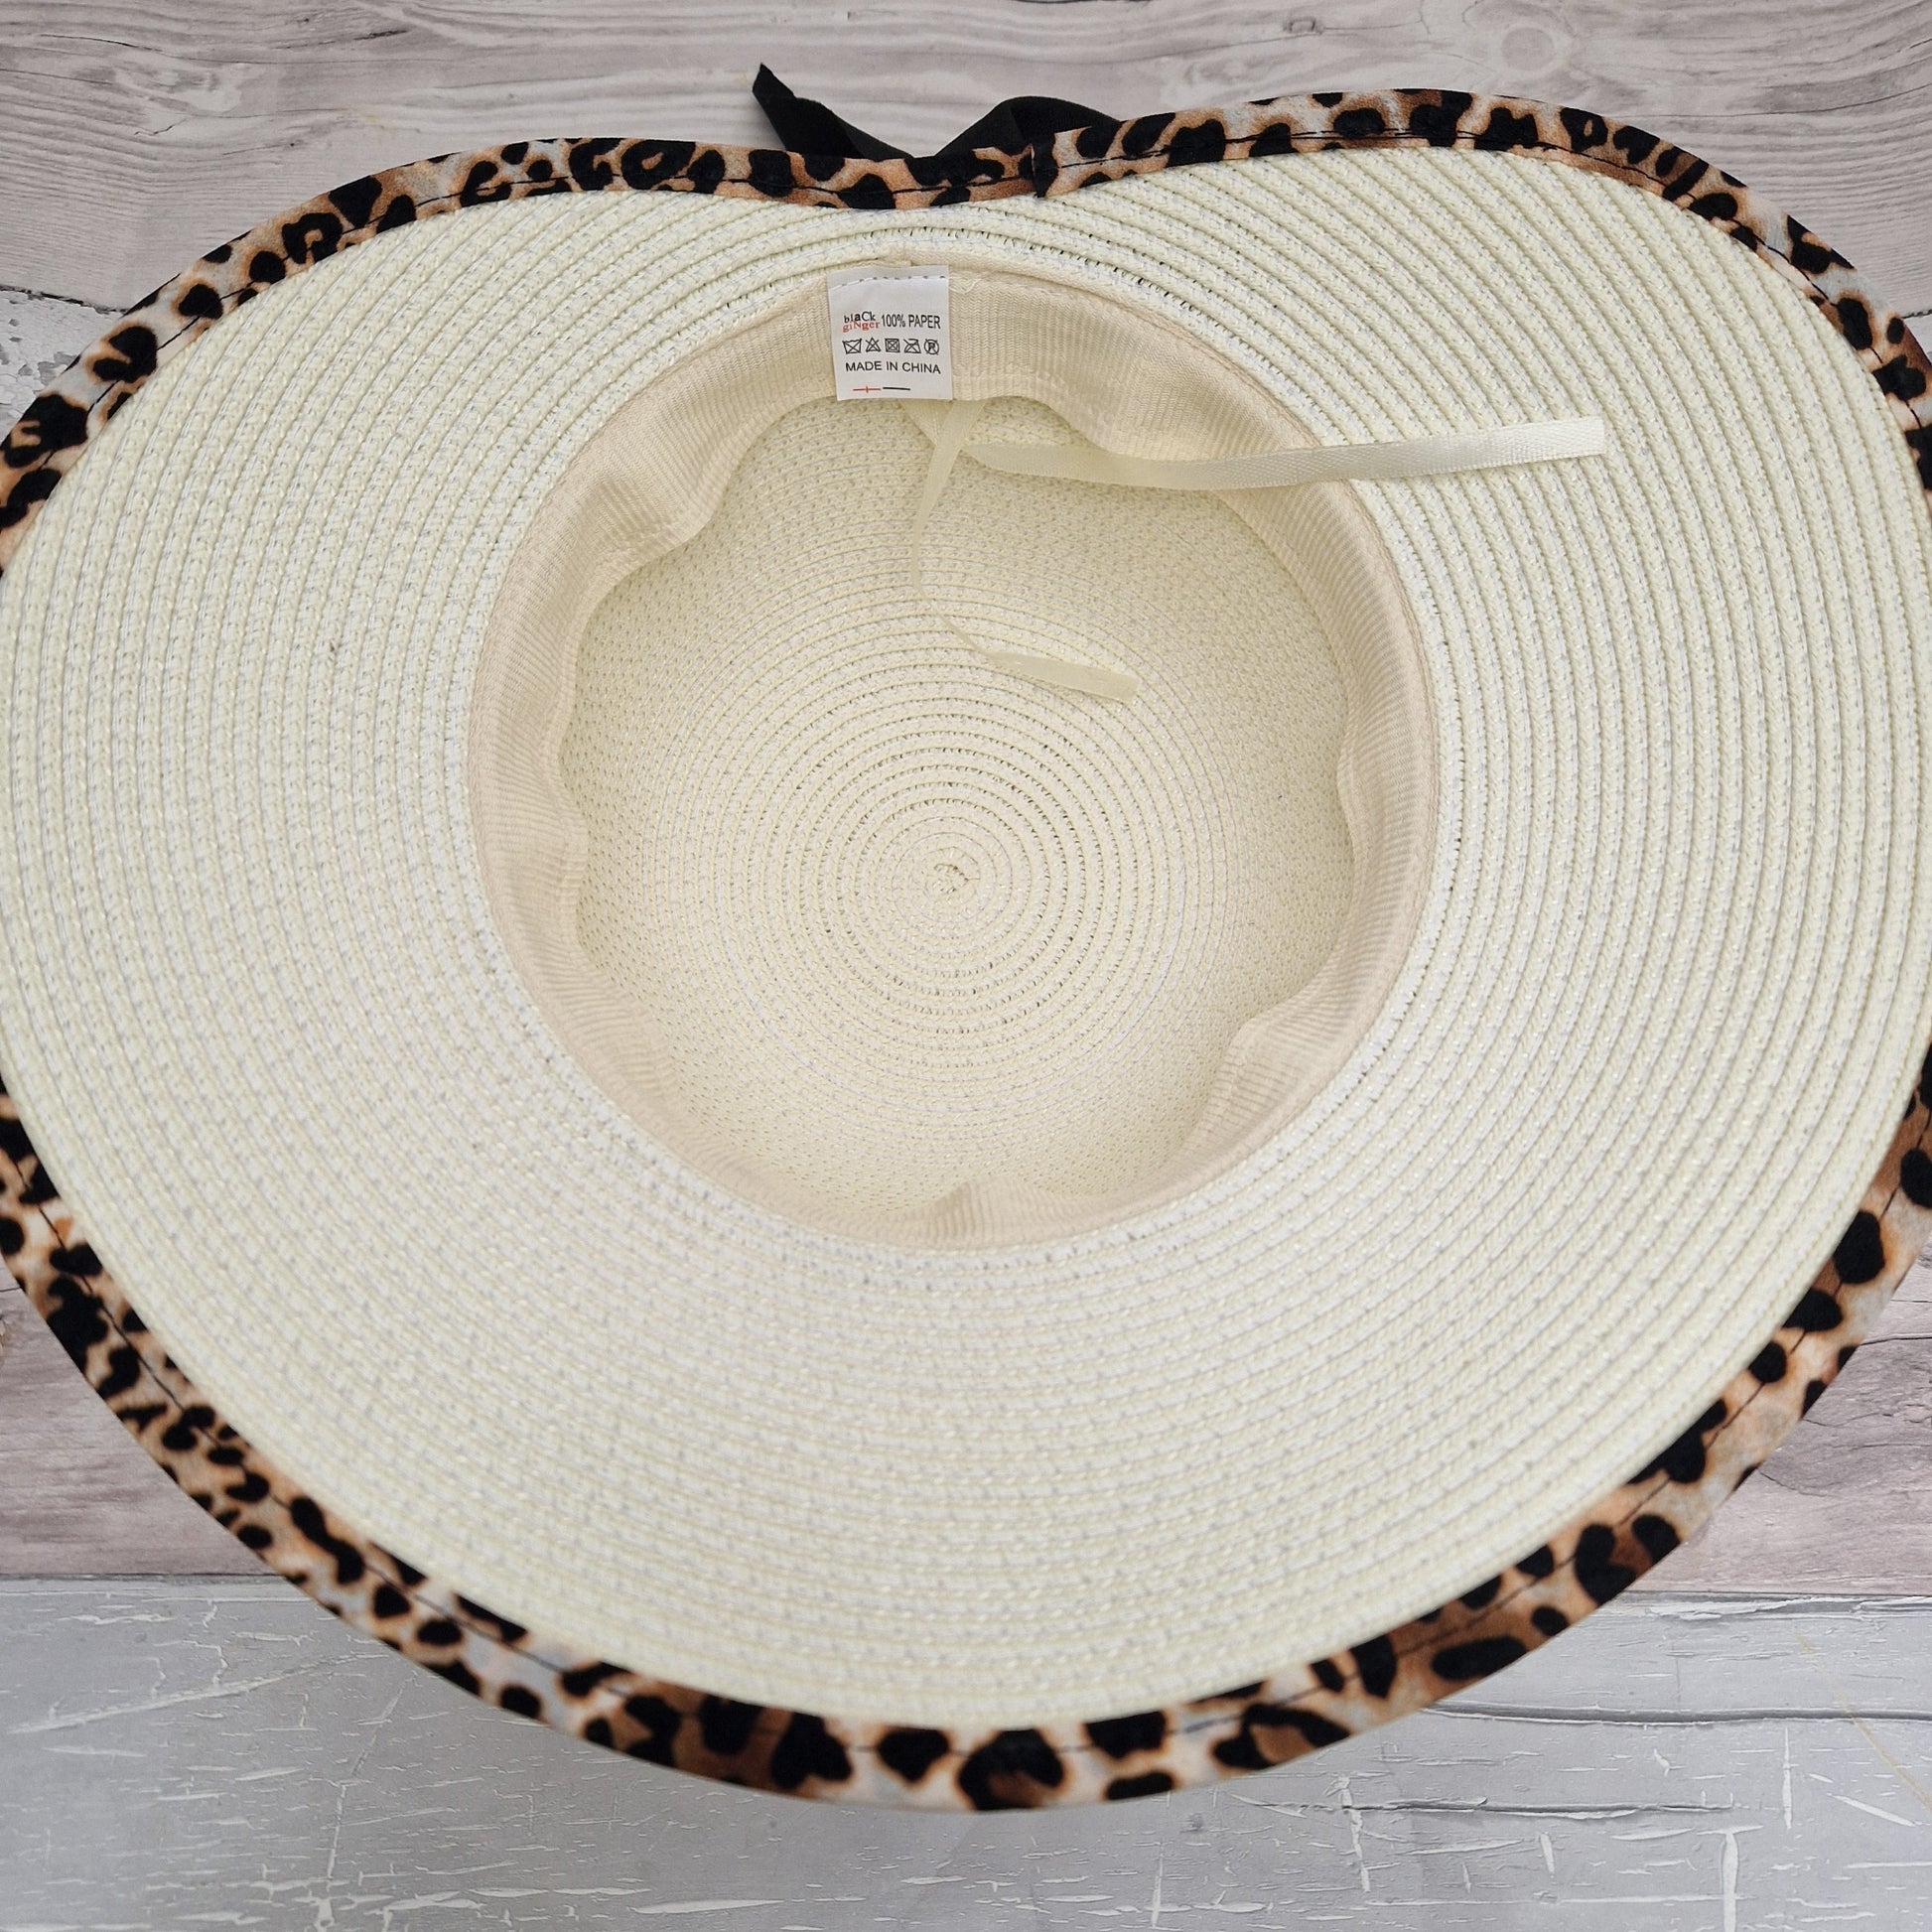 Cream open backed hat with an animal print trim and black bow.